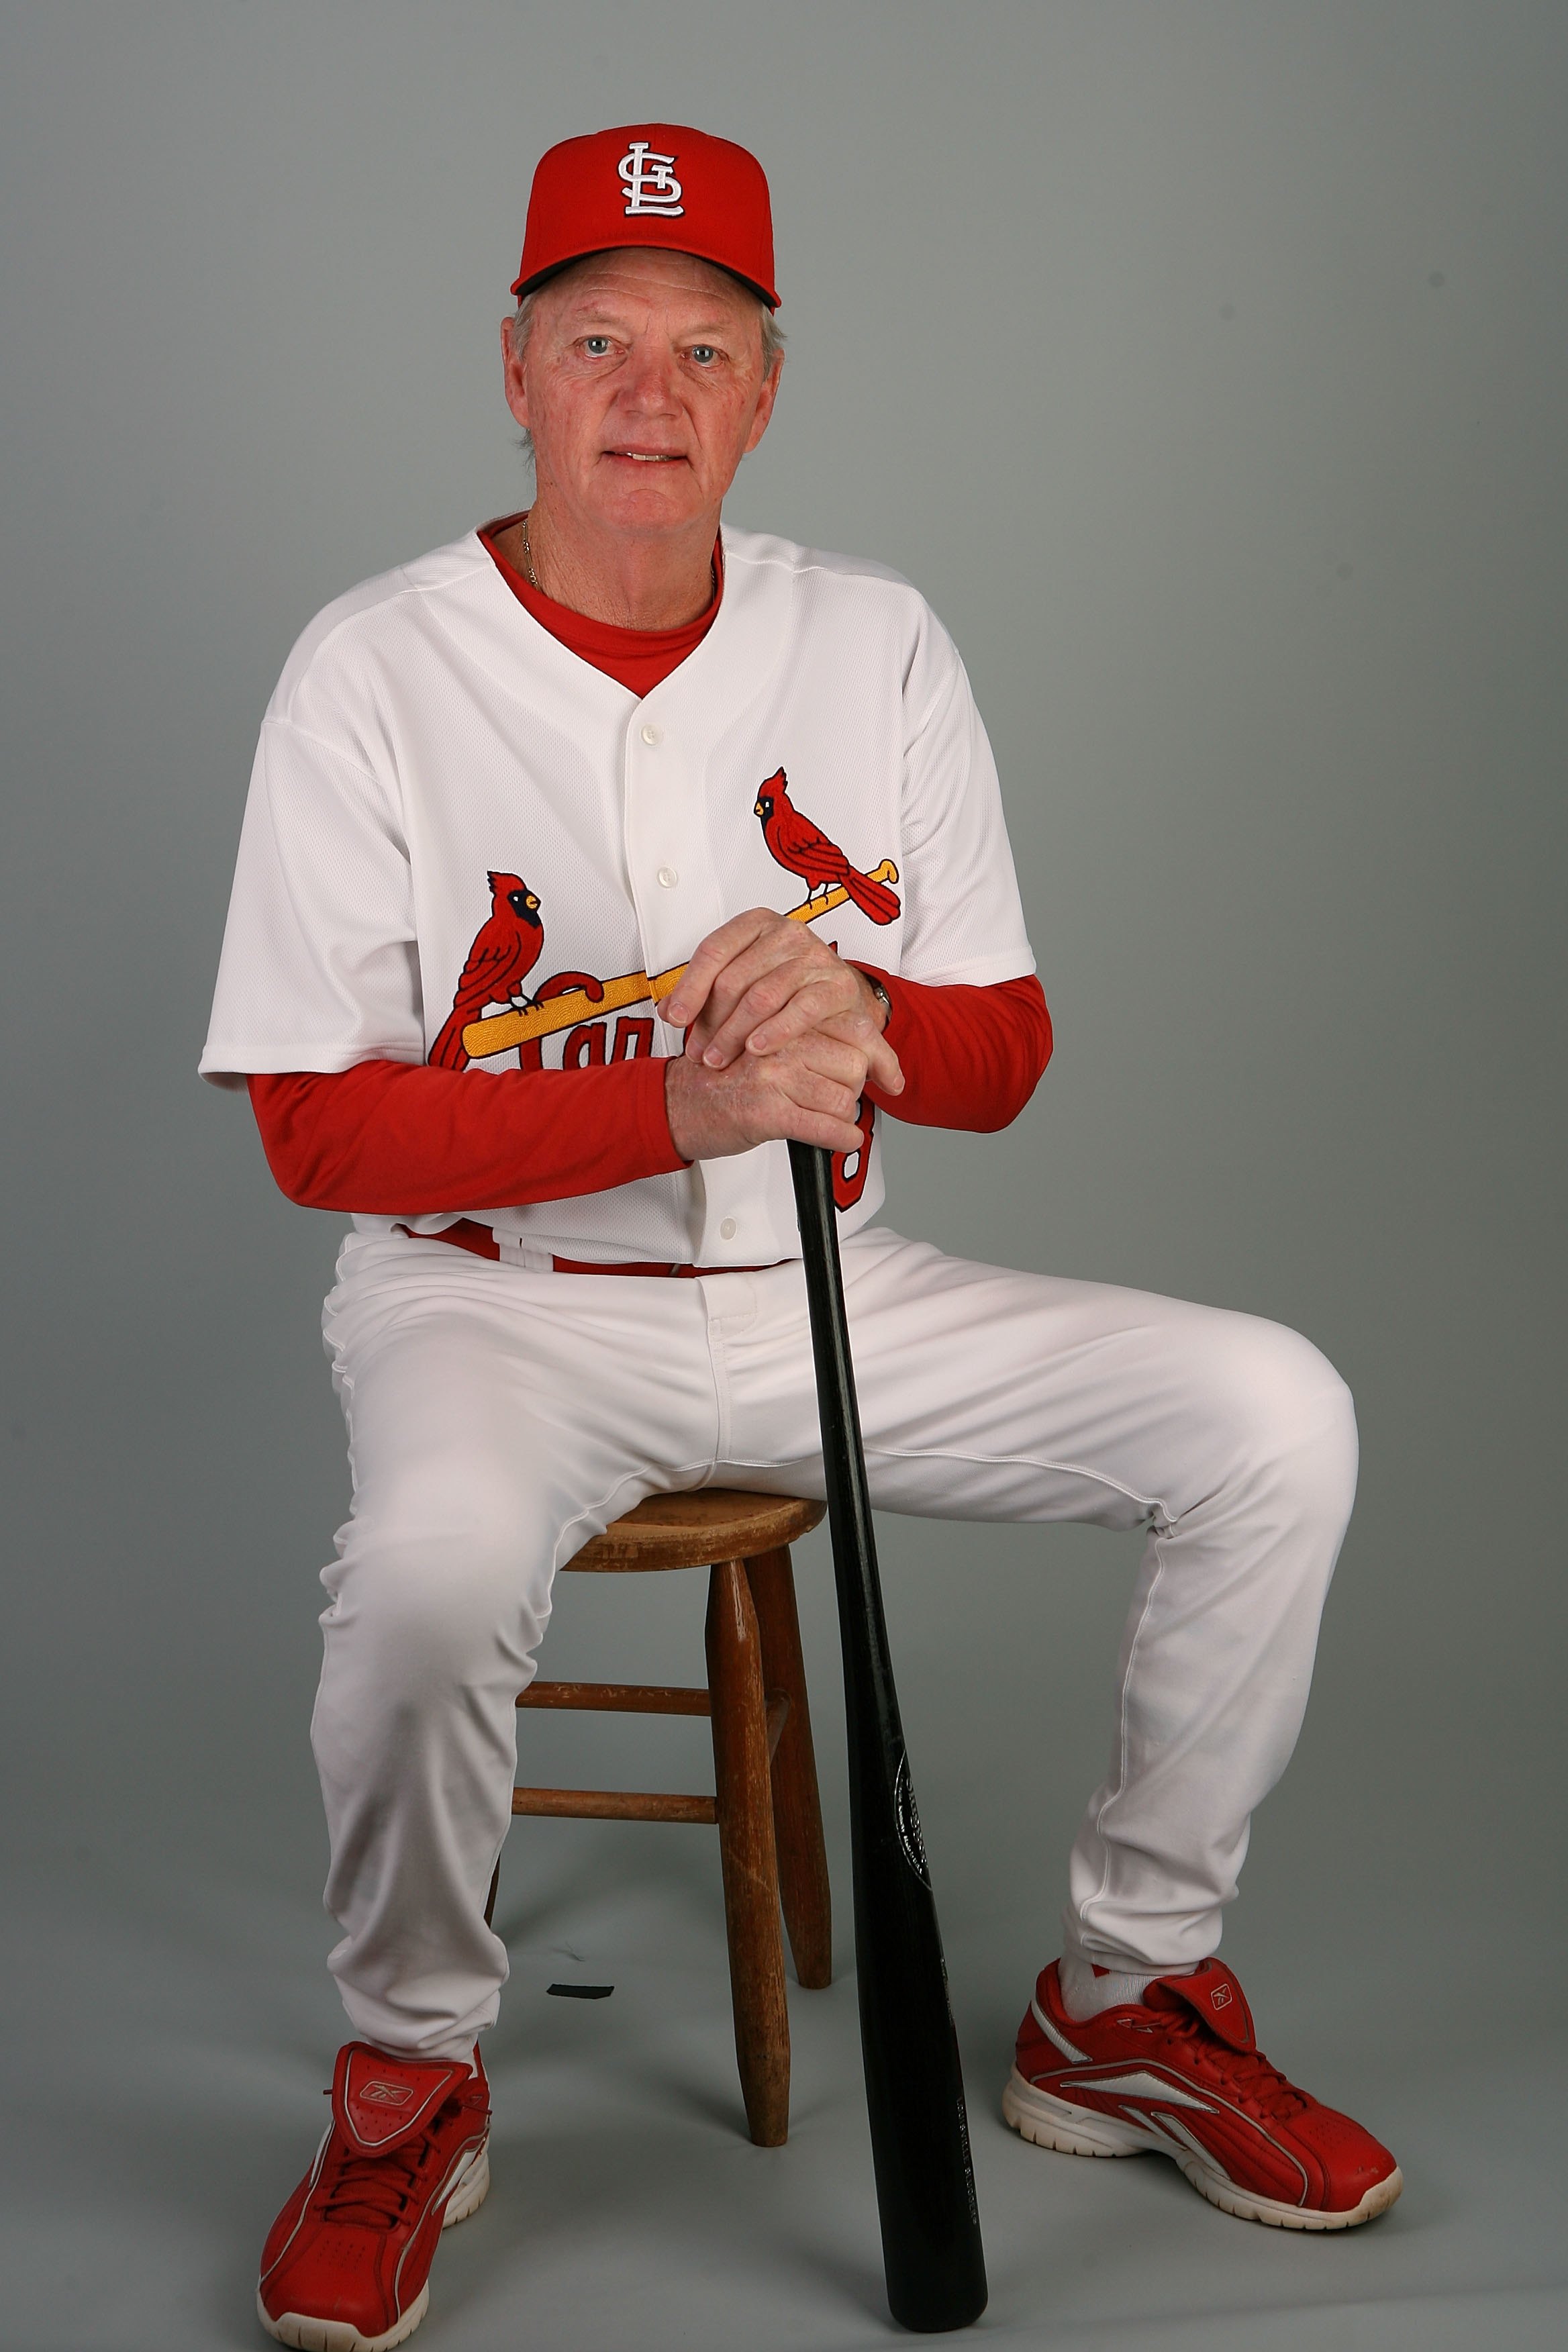 Former Cardinals pitching coach inducted into Missouri Sports HOF